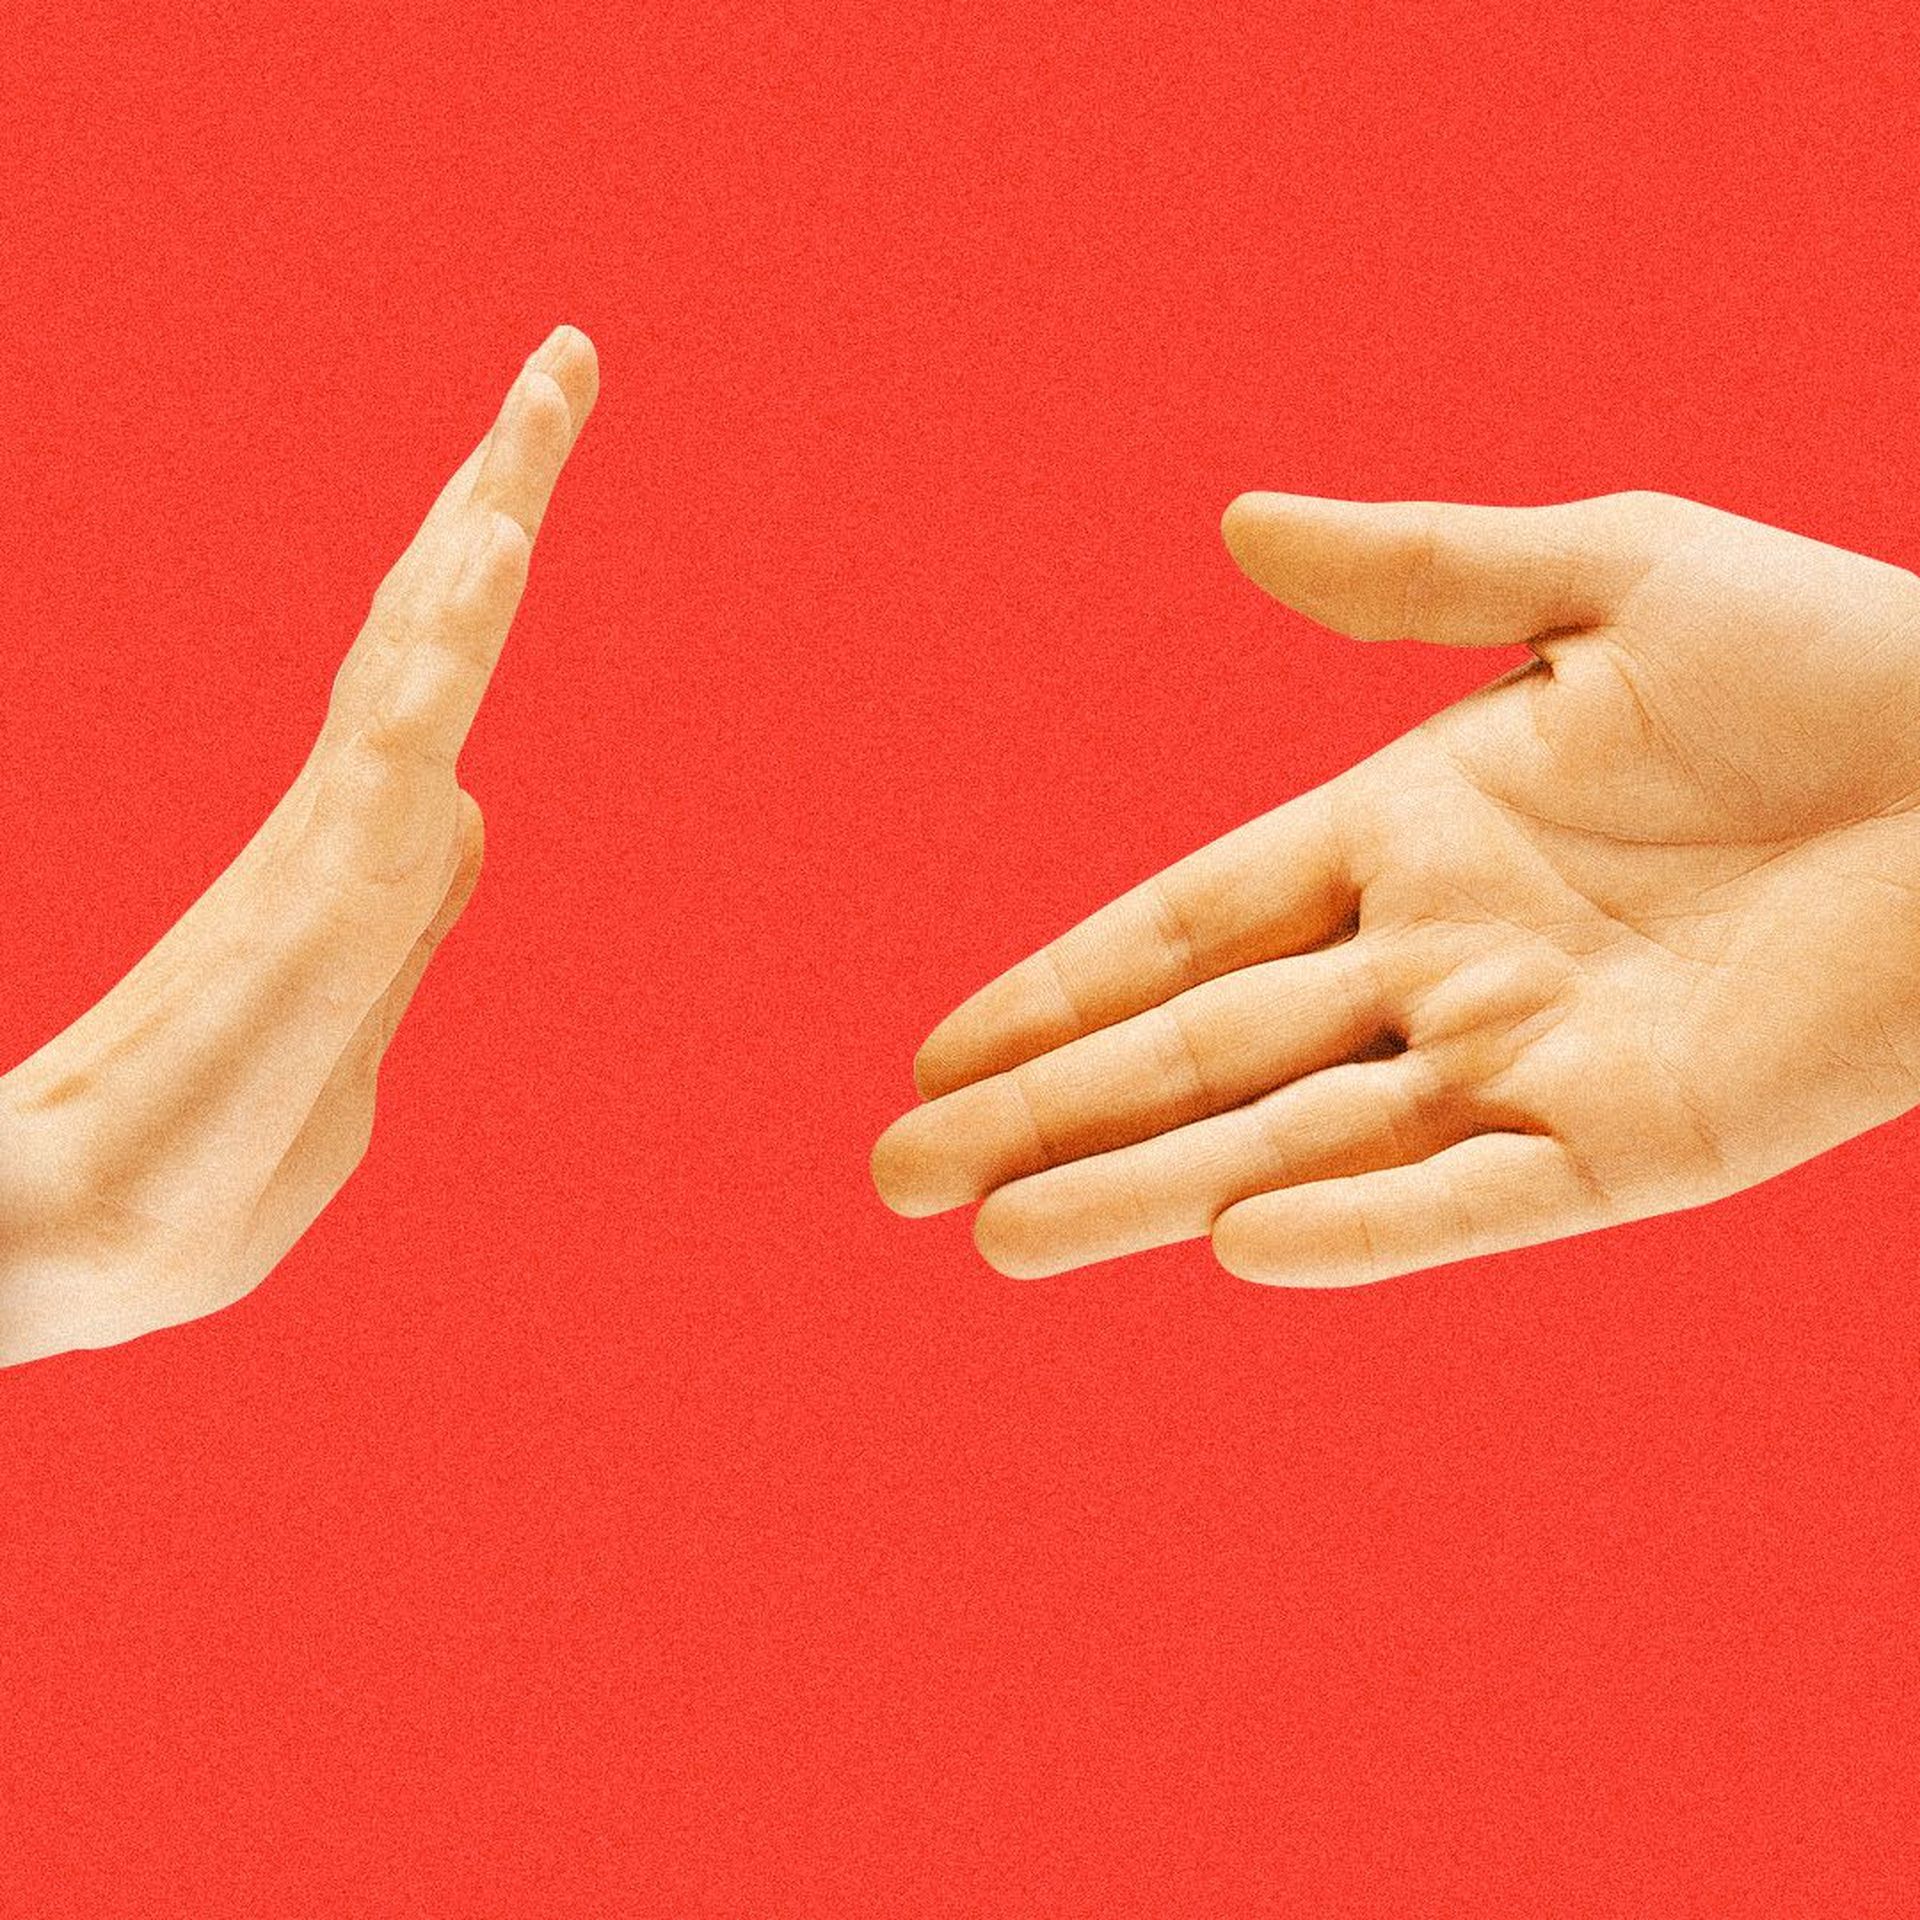 Illustration of a hand reaching out for a hand shake with another hand making a stop gesture. 